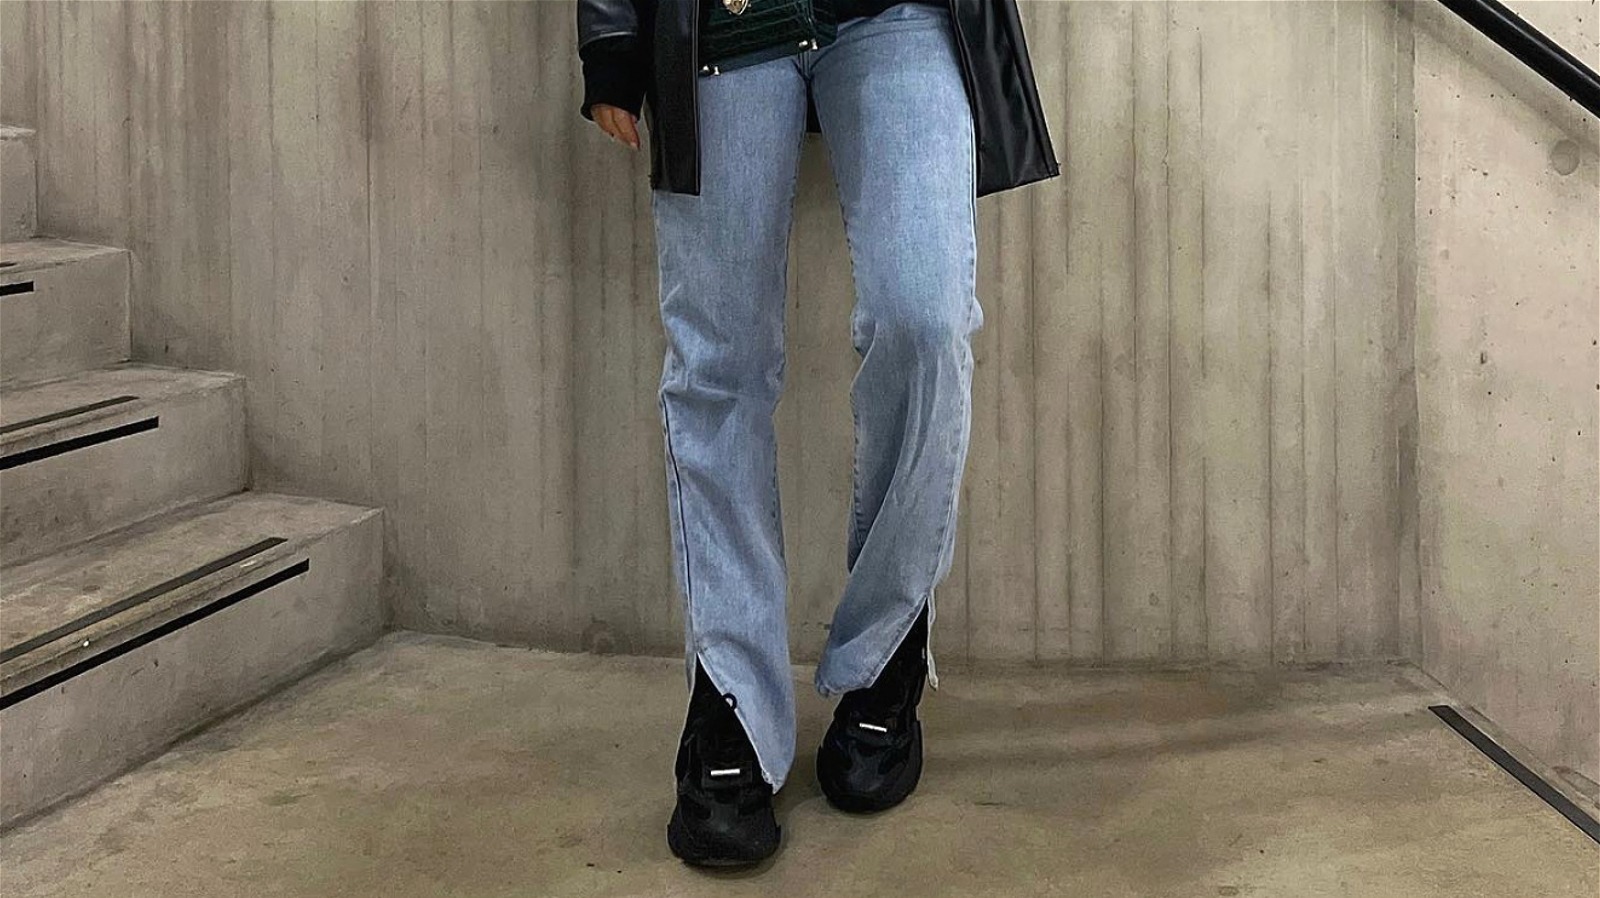 Bootcut Pants, Ways To Style Bootcut Pants, How To Style Bootcut Pants